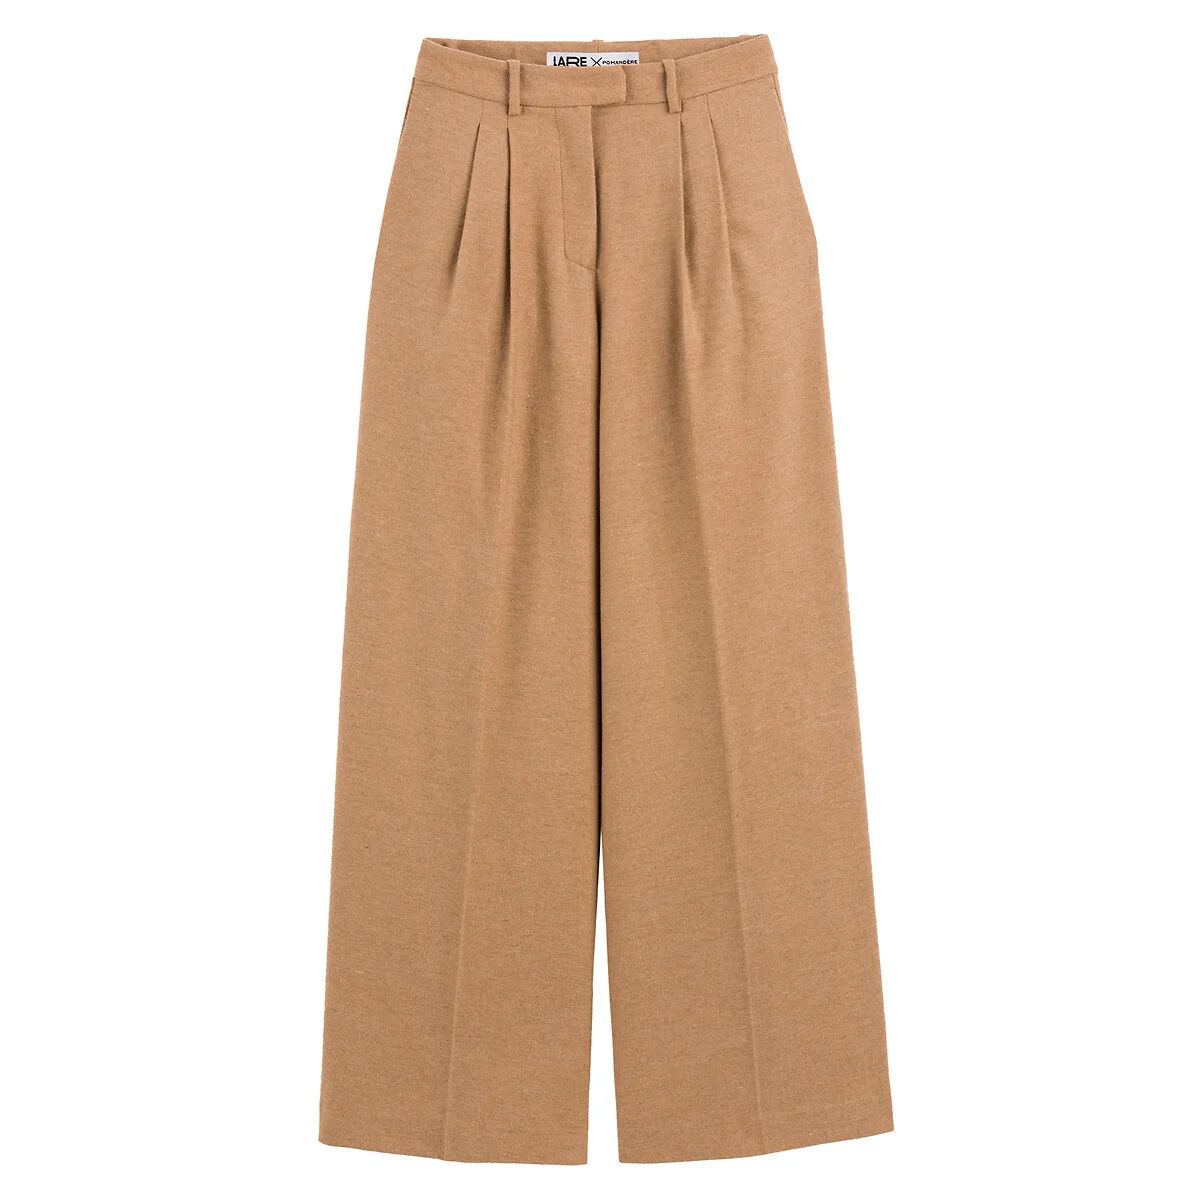 Wide Leg Trousers with Pleat Front and High Waist, Length 28.5" | La Redoute (UK)